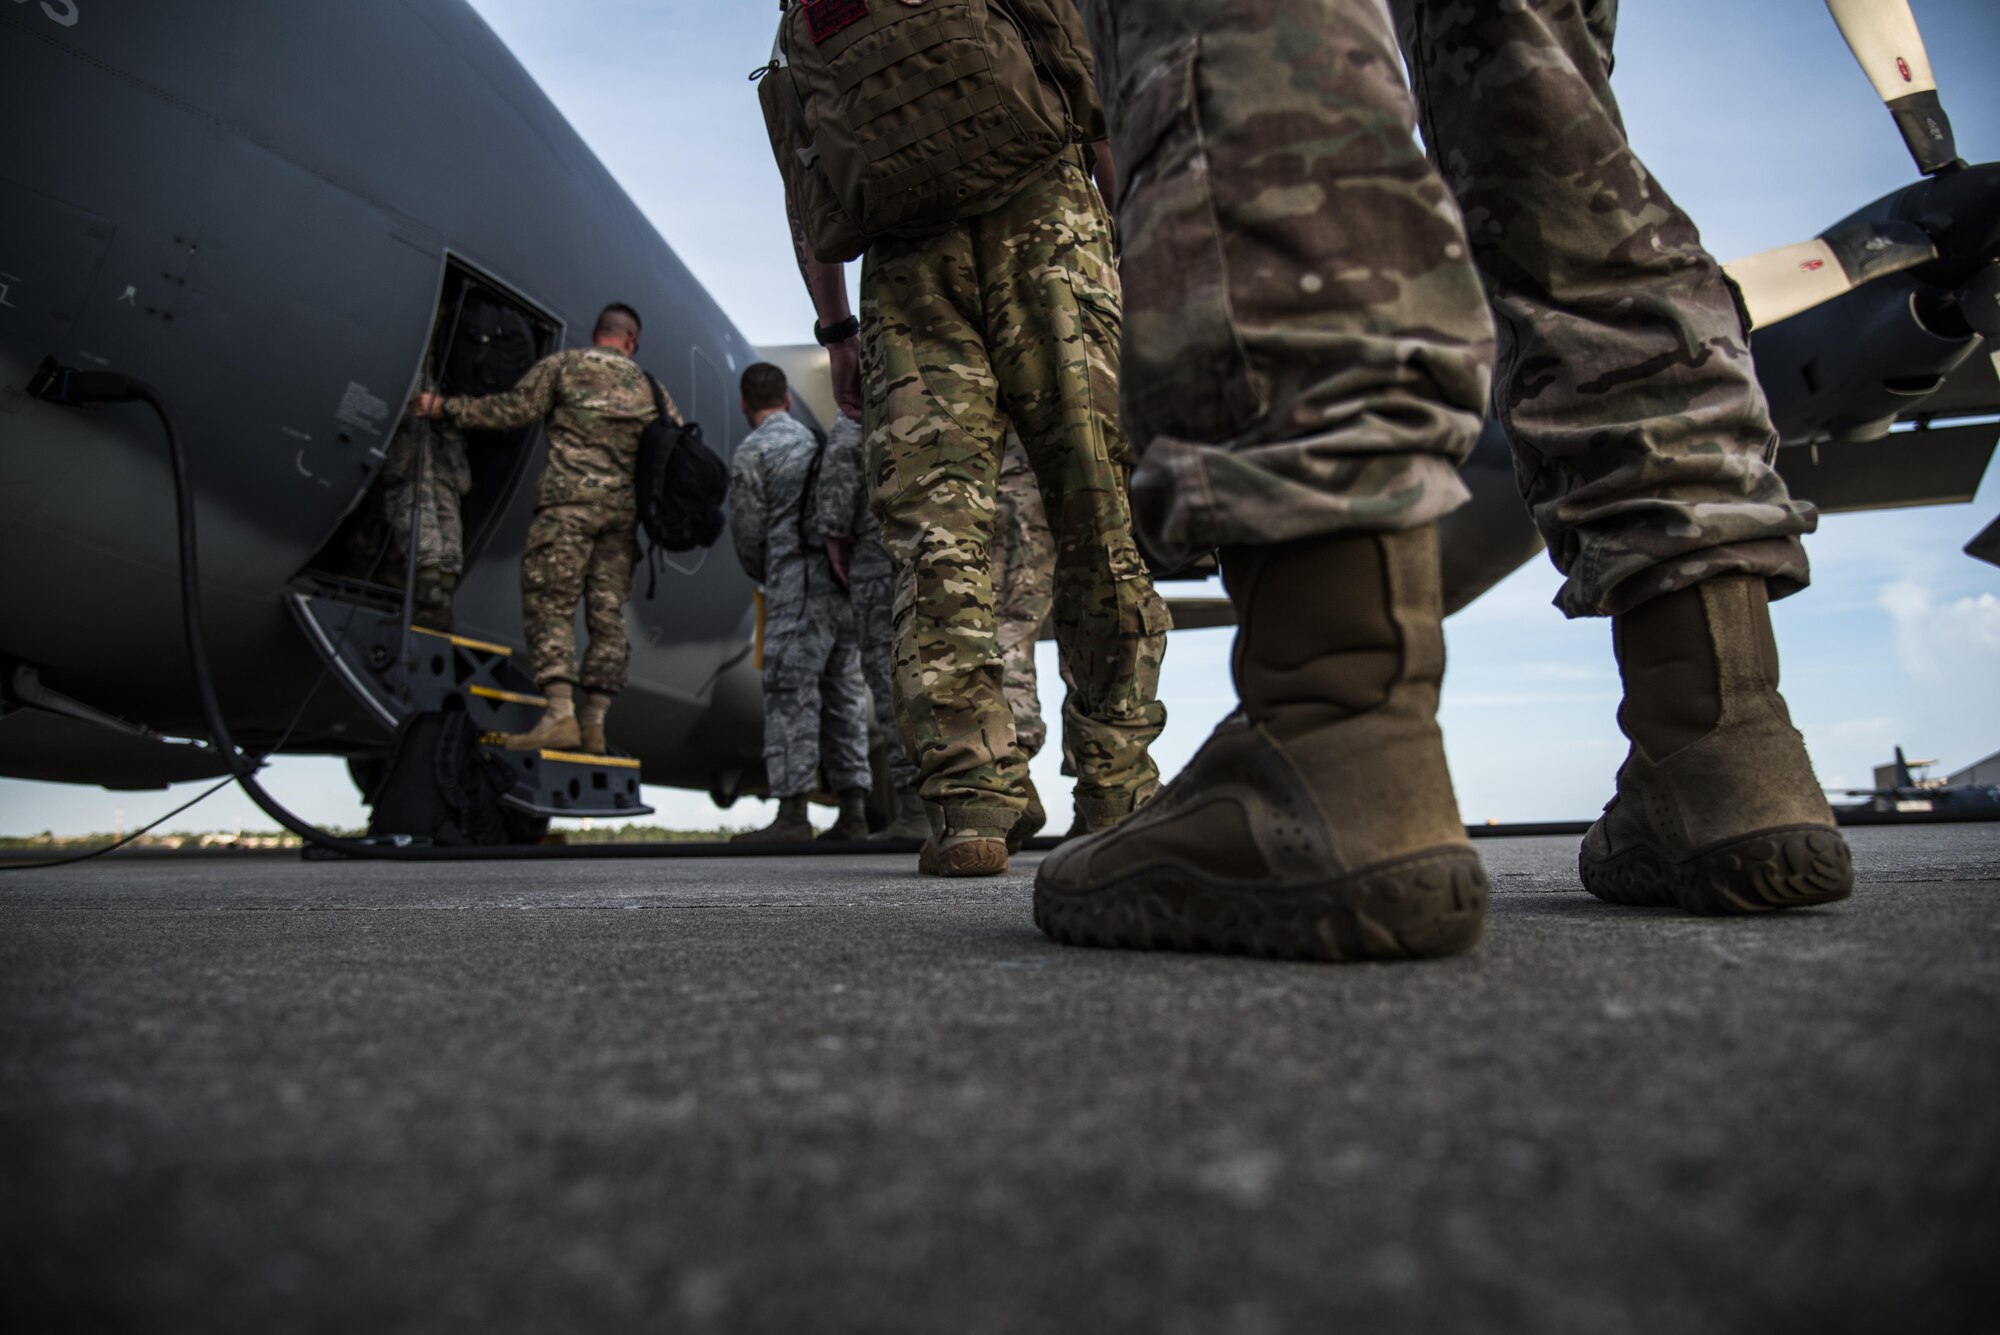 Air Commandos board an MC-130H Combat Talon II at Hurlburt Field, Fla., Aug.15, 2016. Airmen with the 1st Special Operations Wing departed for Wright Patterson Air Force Base, Ohio, to participate in Task Force Exercise Olympus Archer. Olympus Archer will maximize training opportunities for more than 230 Air Commandos, with an emphasis on medical and flying operations. (U.S. Air Force photo by Staff Sgt. Christopher Callaway)